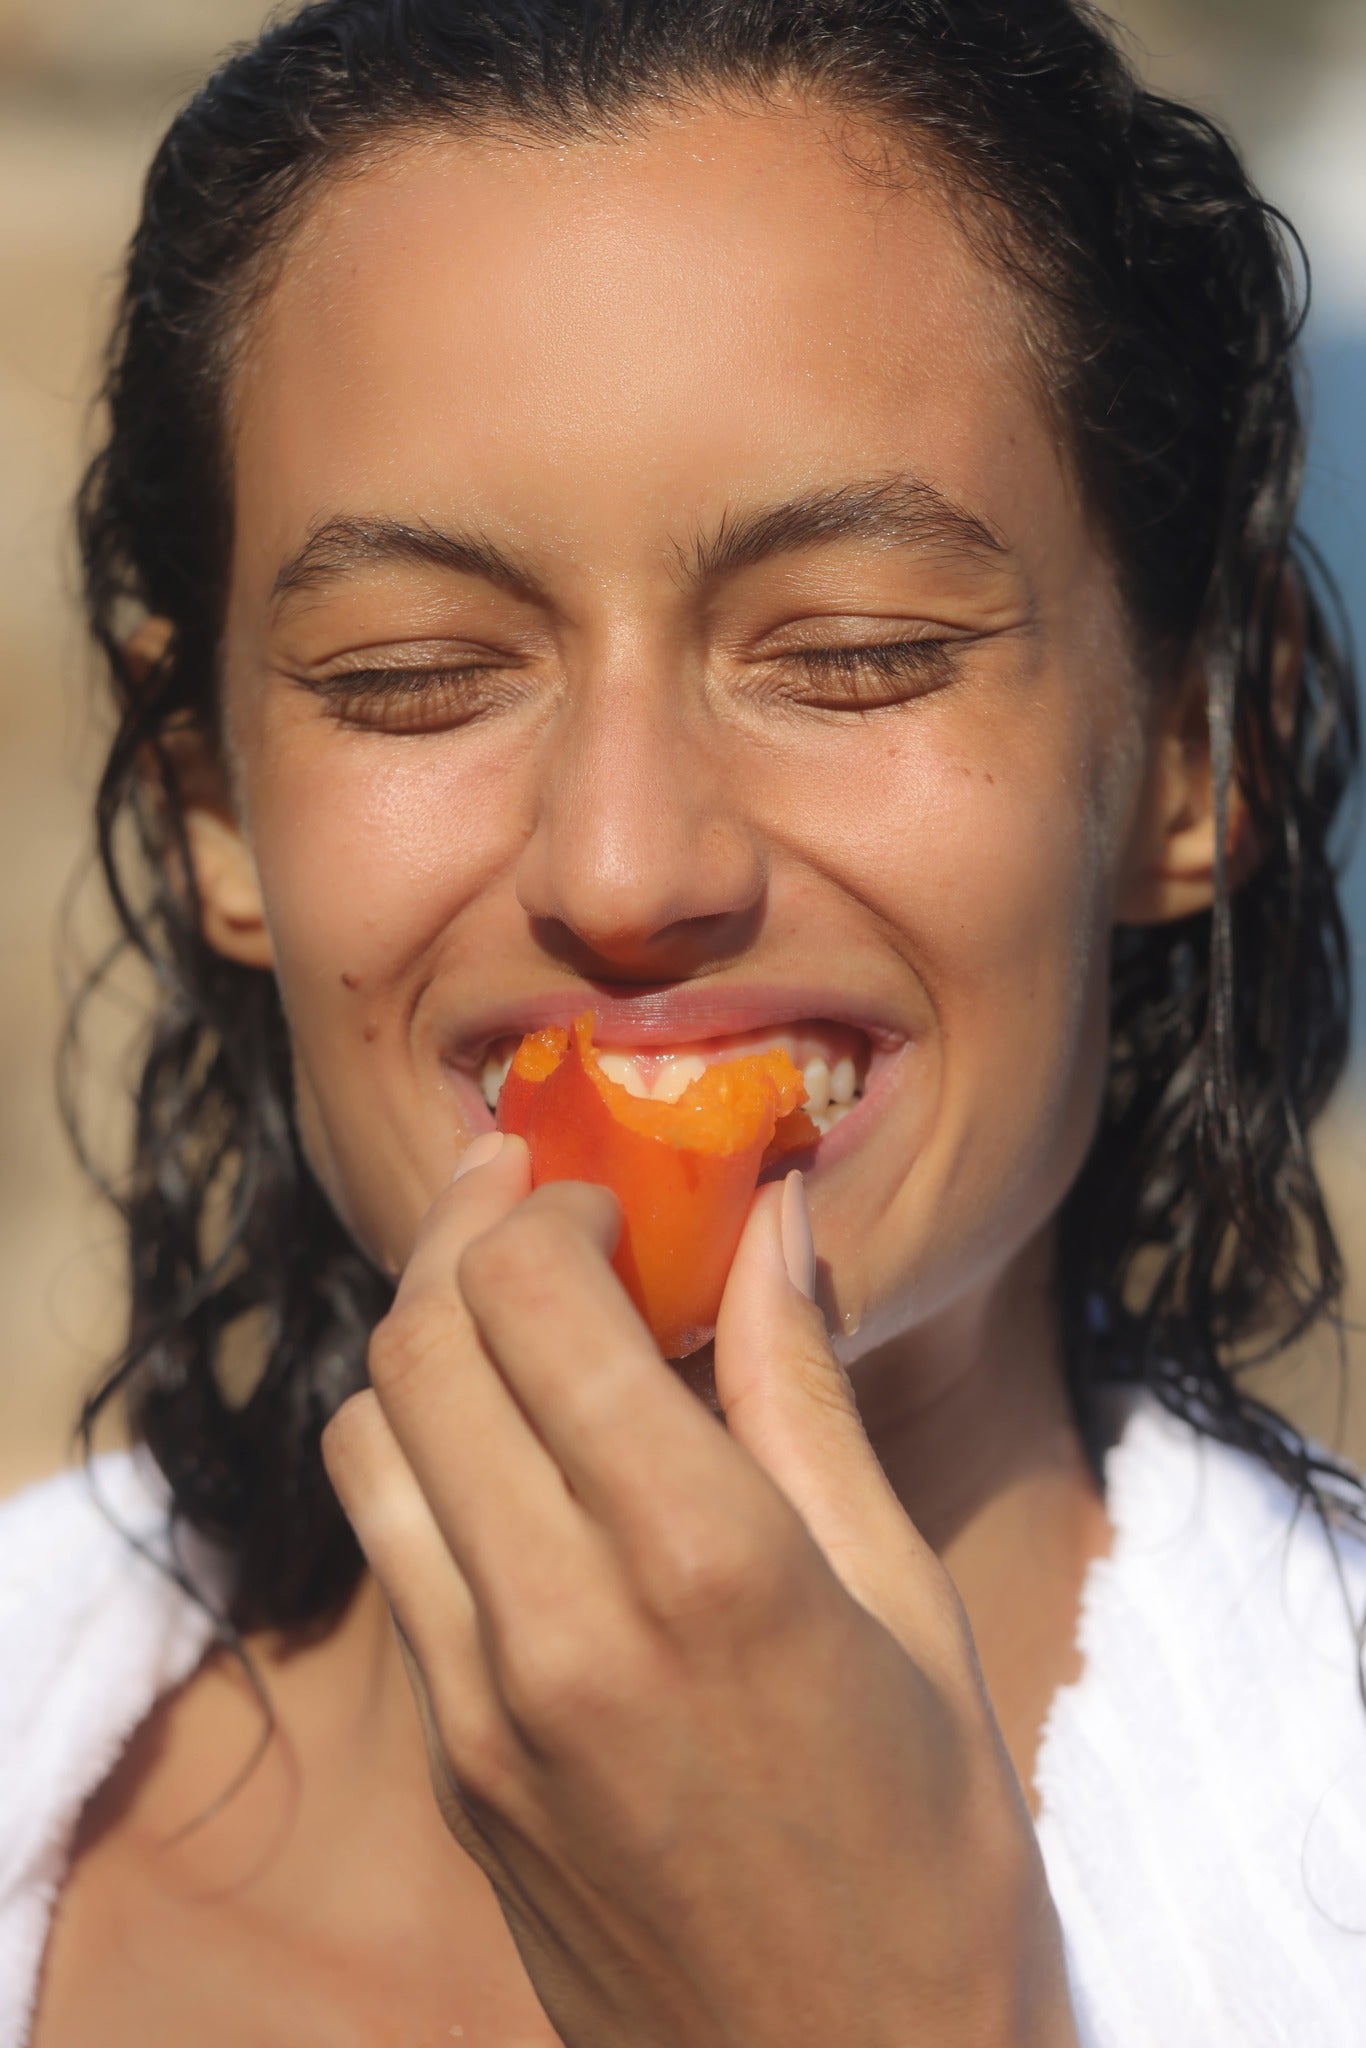 Woman at the beach, smiling with her eyes closed and biting into a fresh apricot. Her hair is wet and the sun is shining.